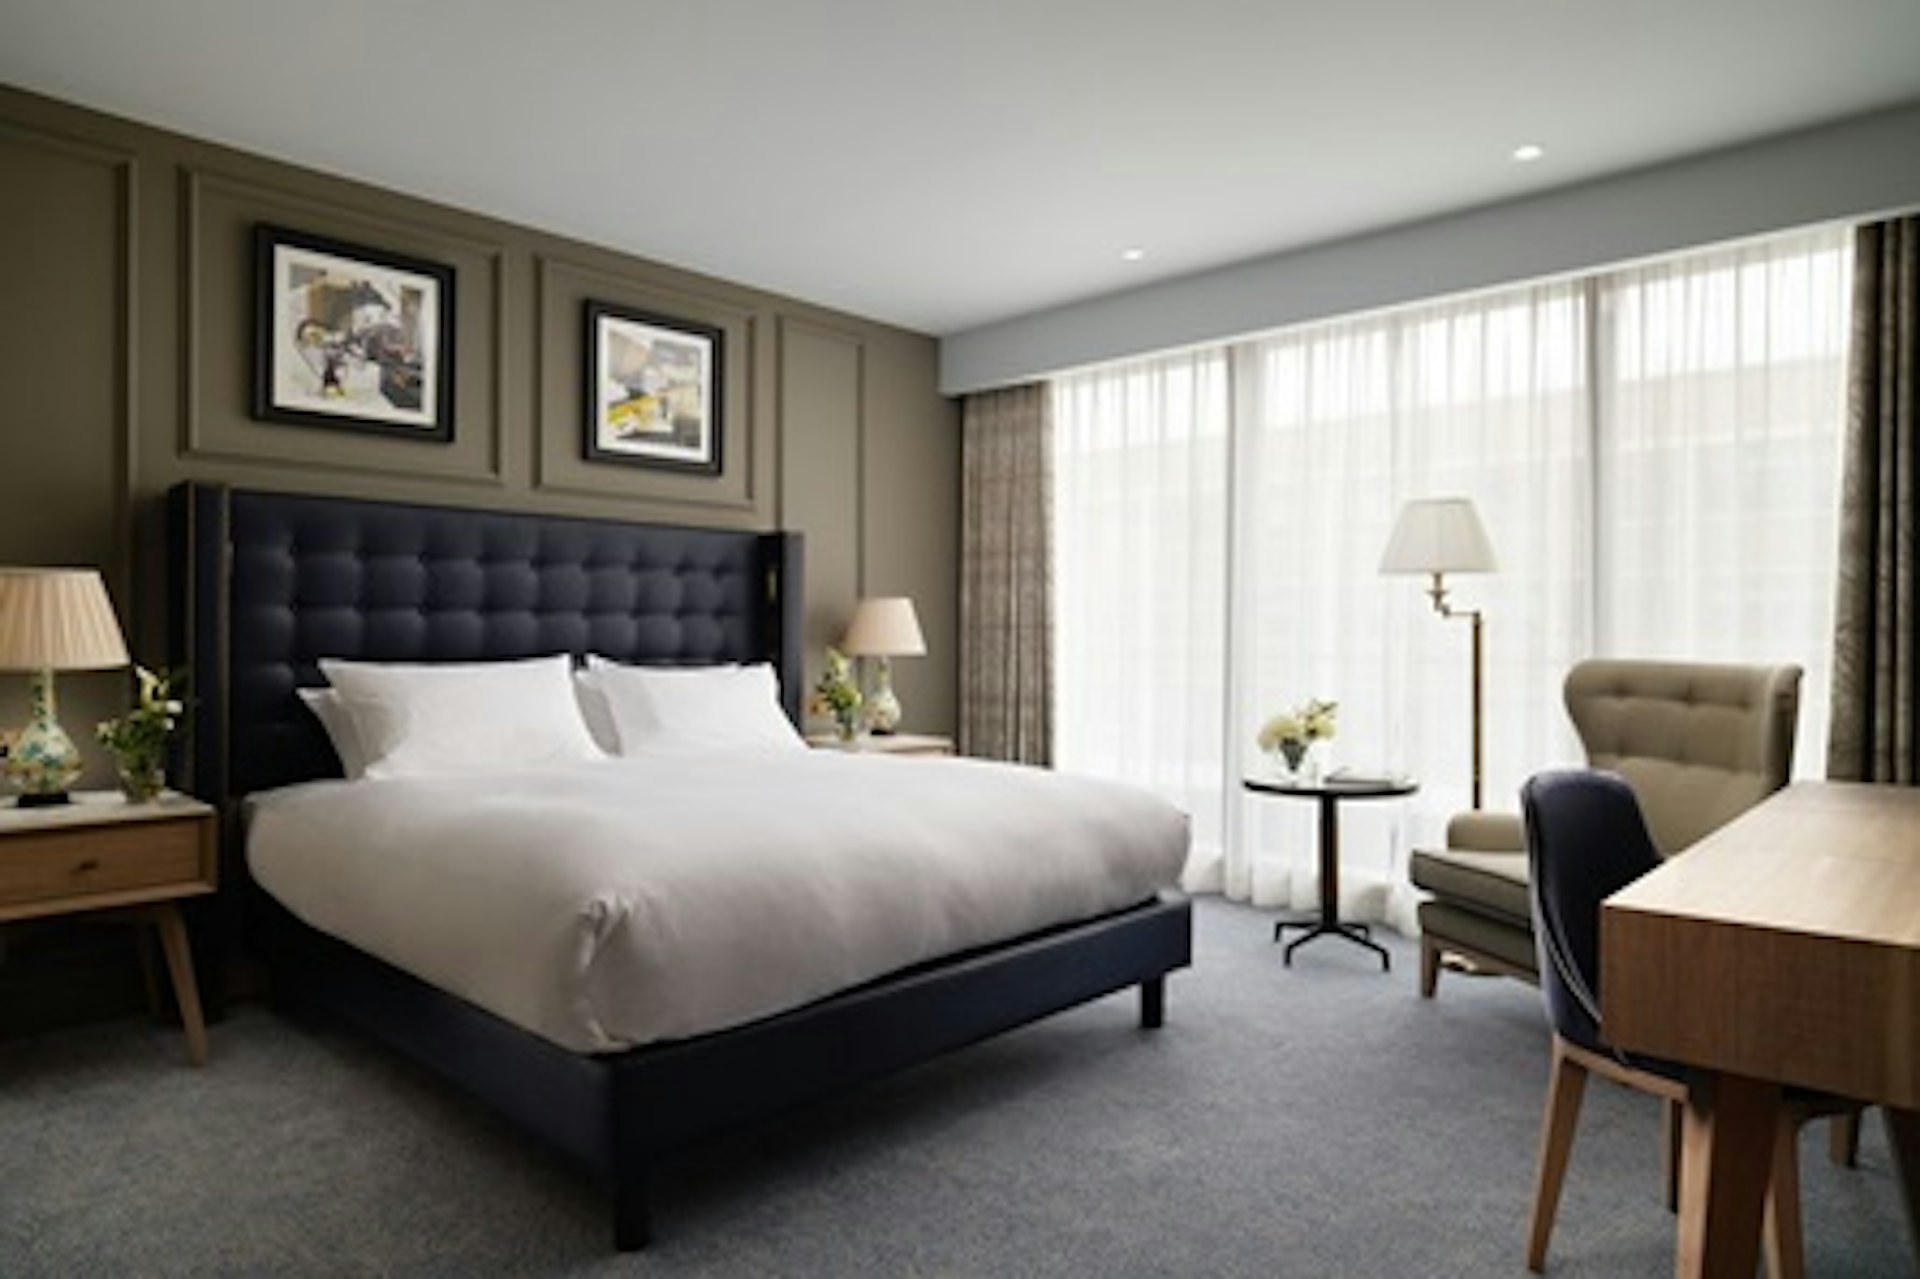 One Night Luxury Break for Two at the 5* Grand, York 3